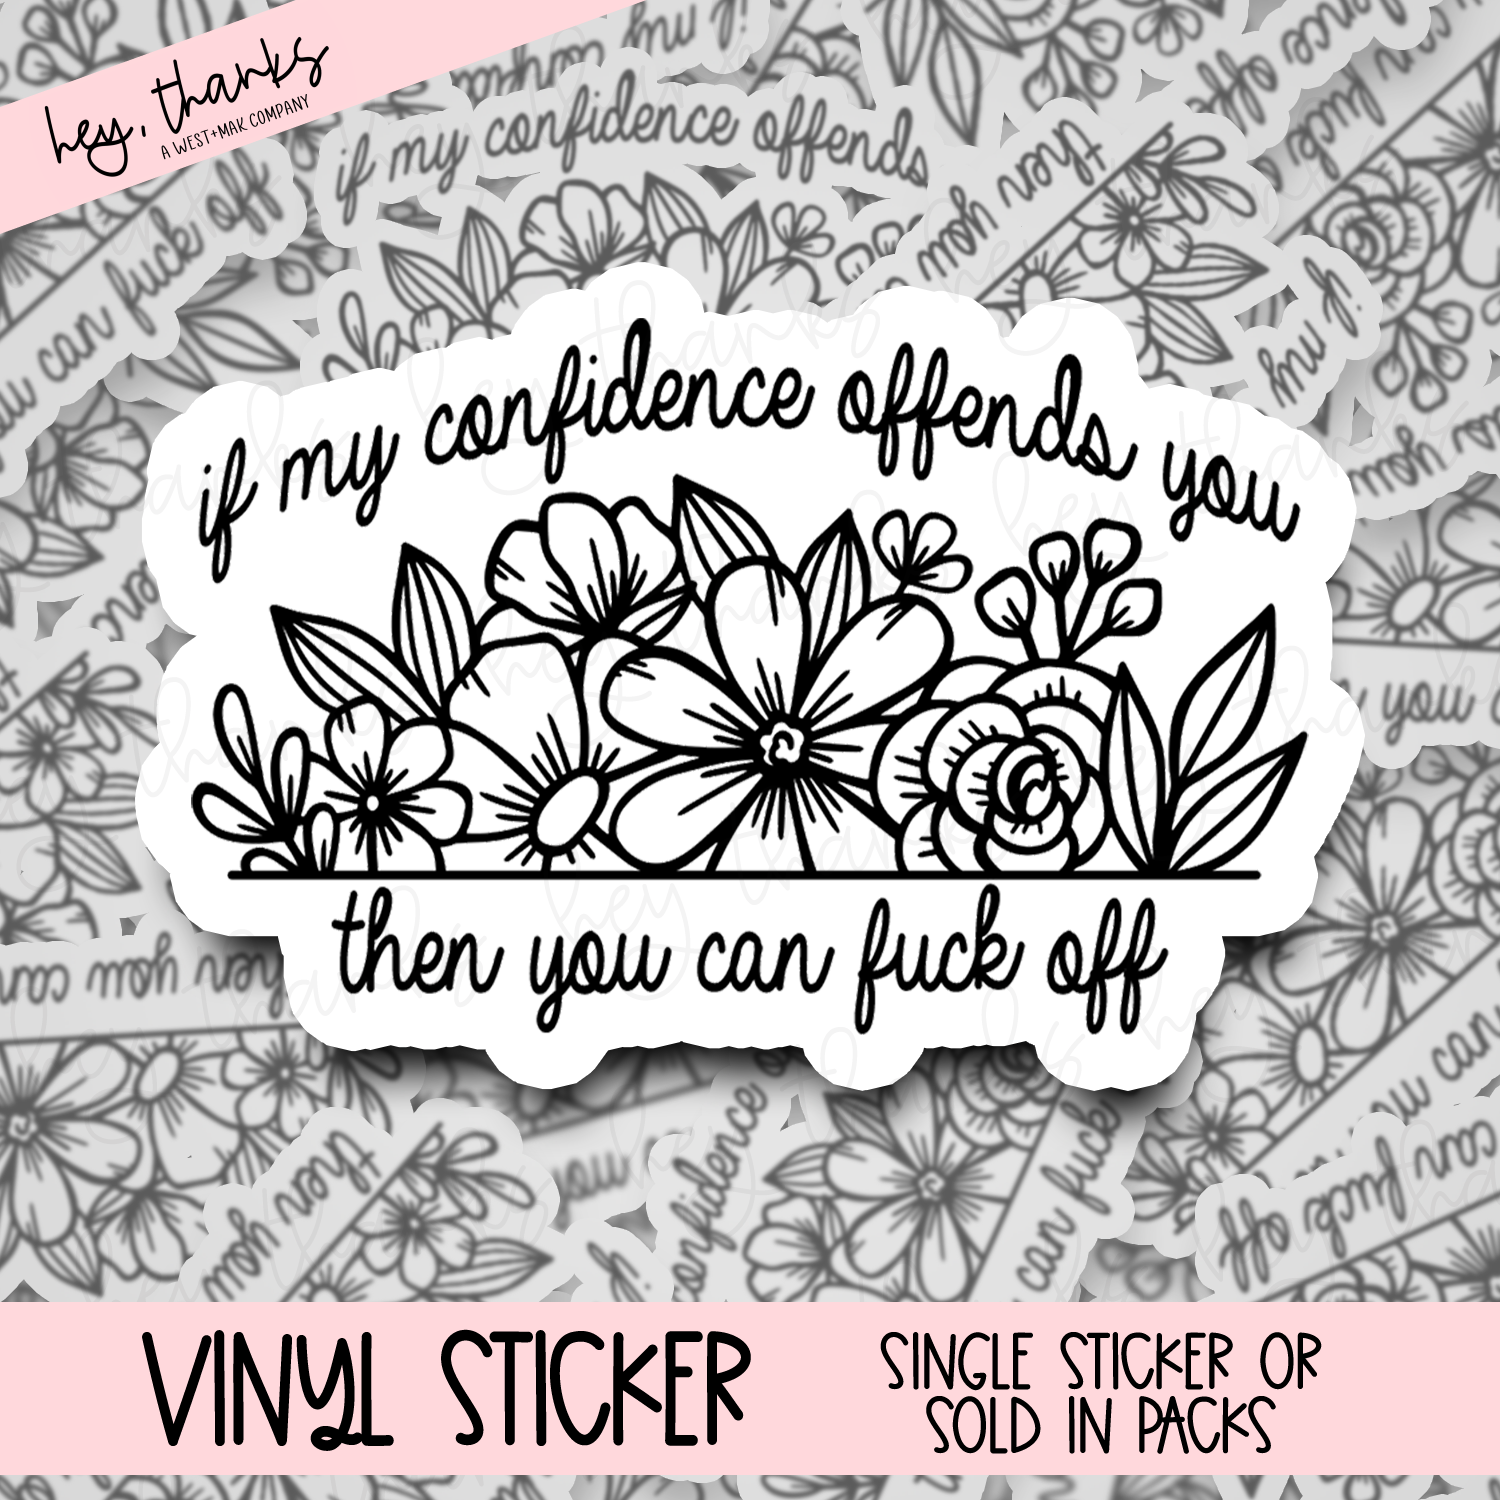 Confidence Offends You - Vinyl Sticker